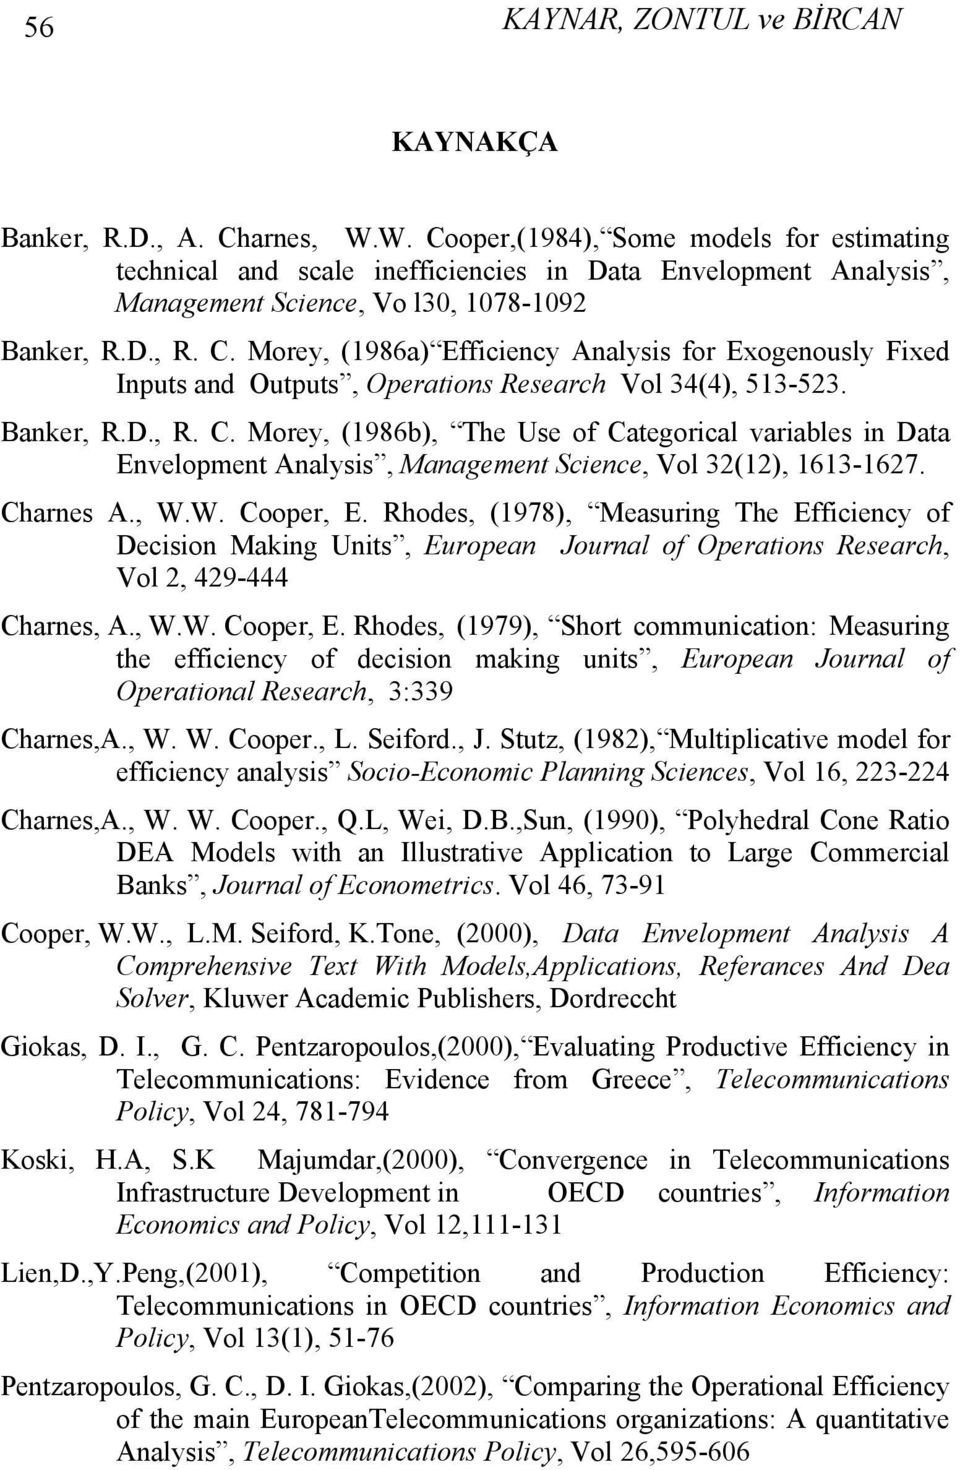 Banker, R.D., R. C. Morey, (986b), The Use of Categorical variables in Data Envelopment Analysis, Management Science, Vol 32(2), 63-627. Charnes A., W.W. Cooper, E.